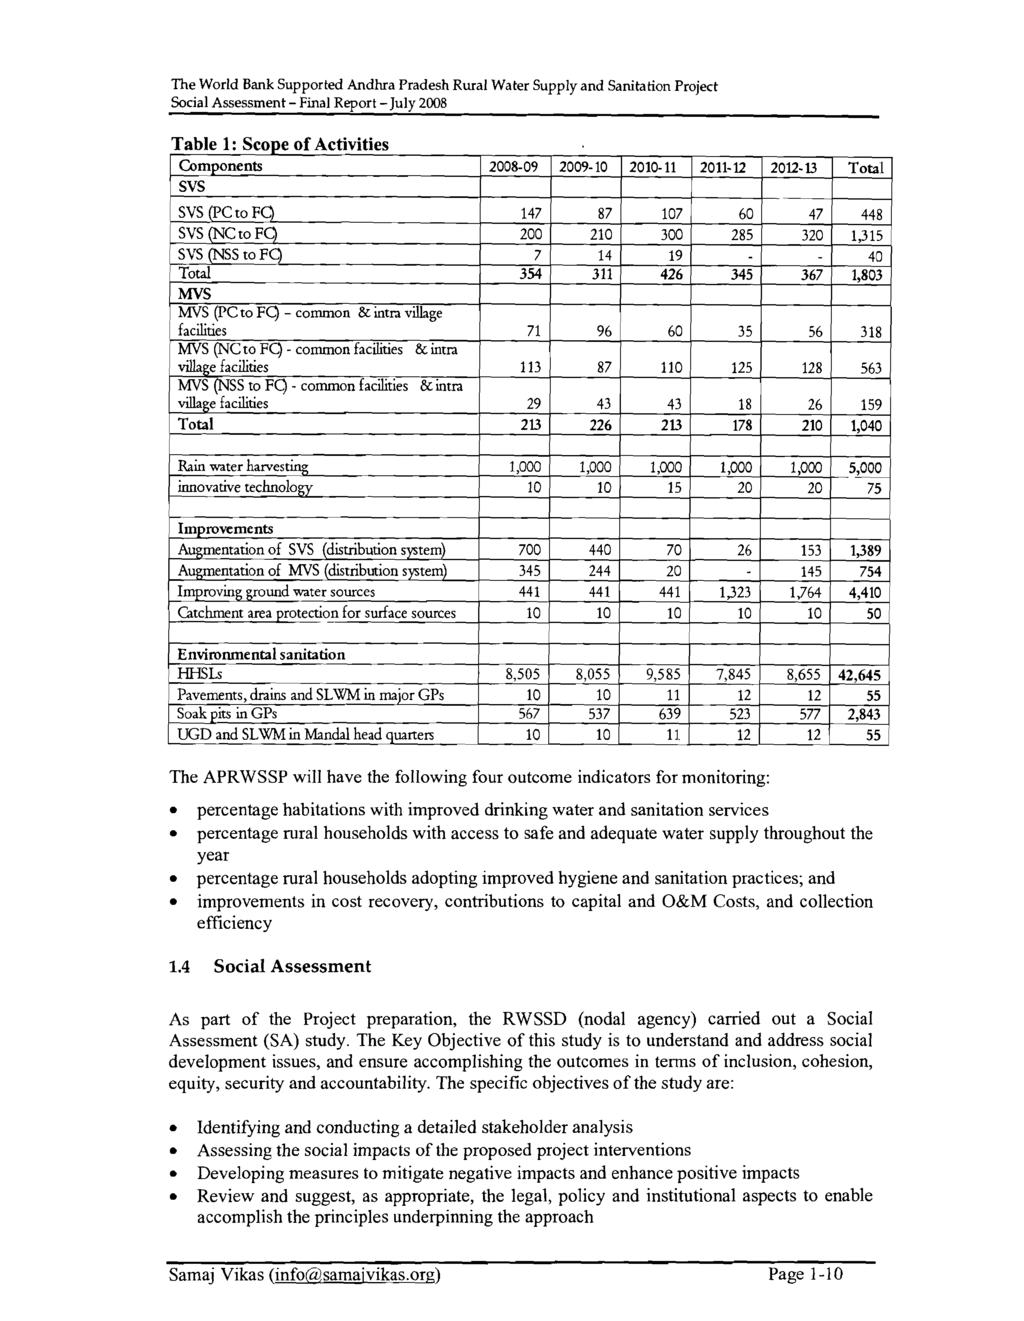 Social Assessment - Final Report -July 2008 Table 1 : Scope of Activities Components svs SVS (PC to FC) SVS (NC to FC) SVS (NSS to FC) Total Mvs MVS (PC to FC) - common & intra village facilities MVS